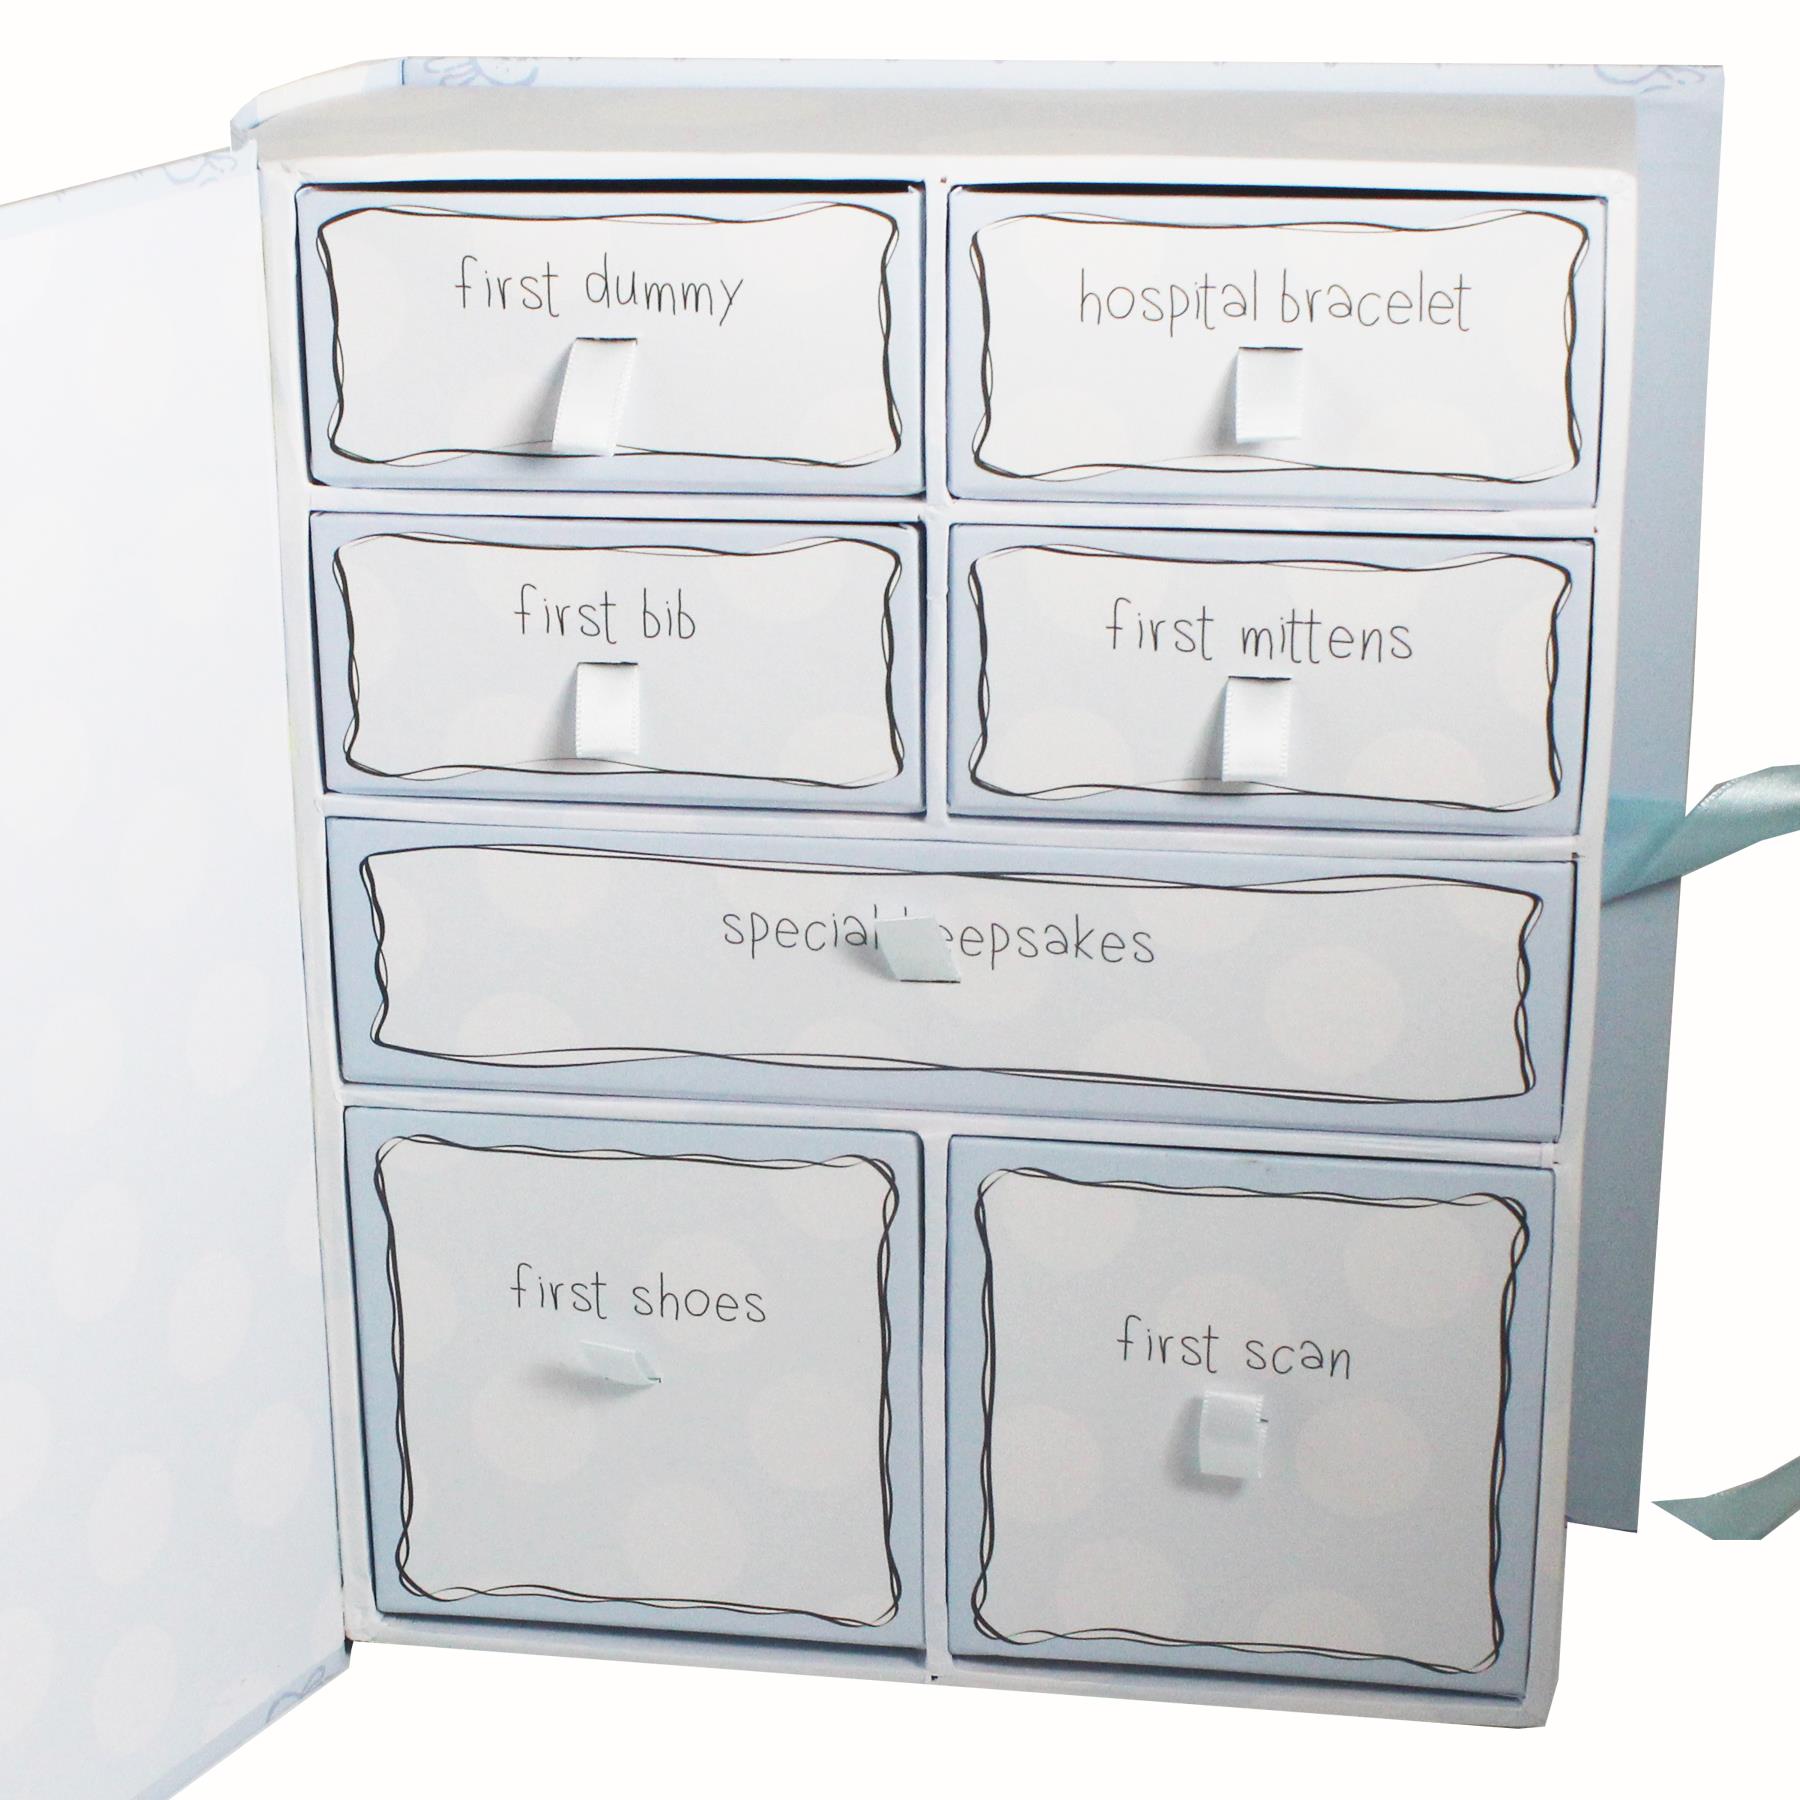 New Baby Keepsake Box with 7 Compartments Little Miracles by Tracey Russell - Boy